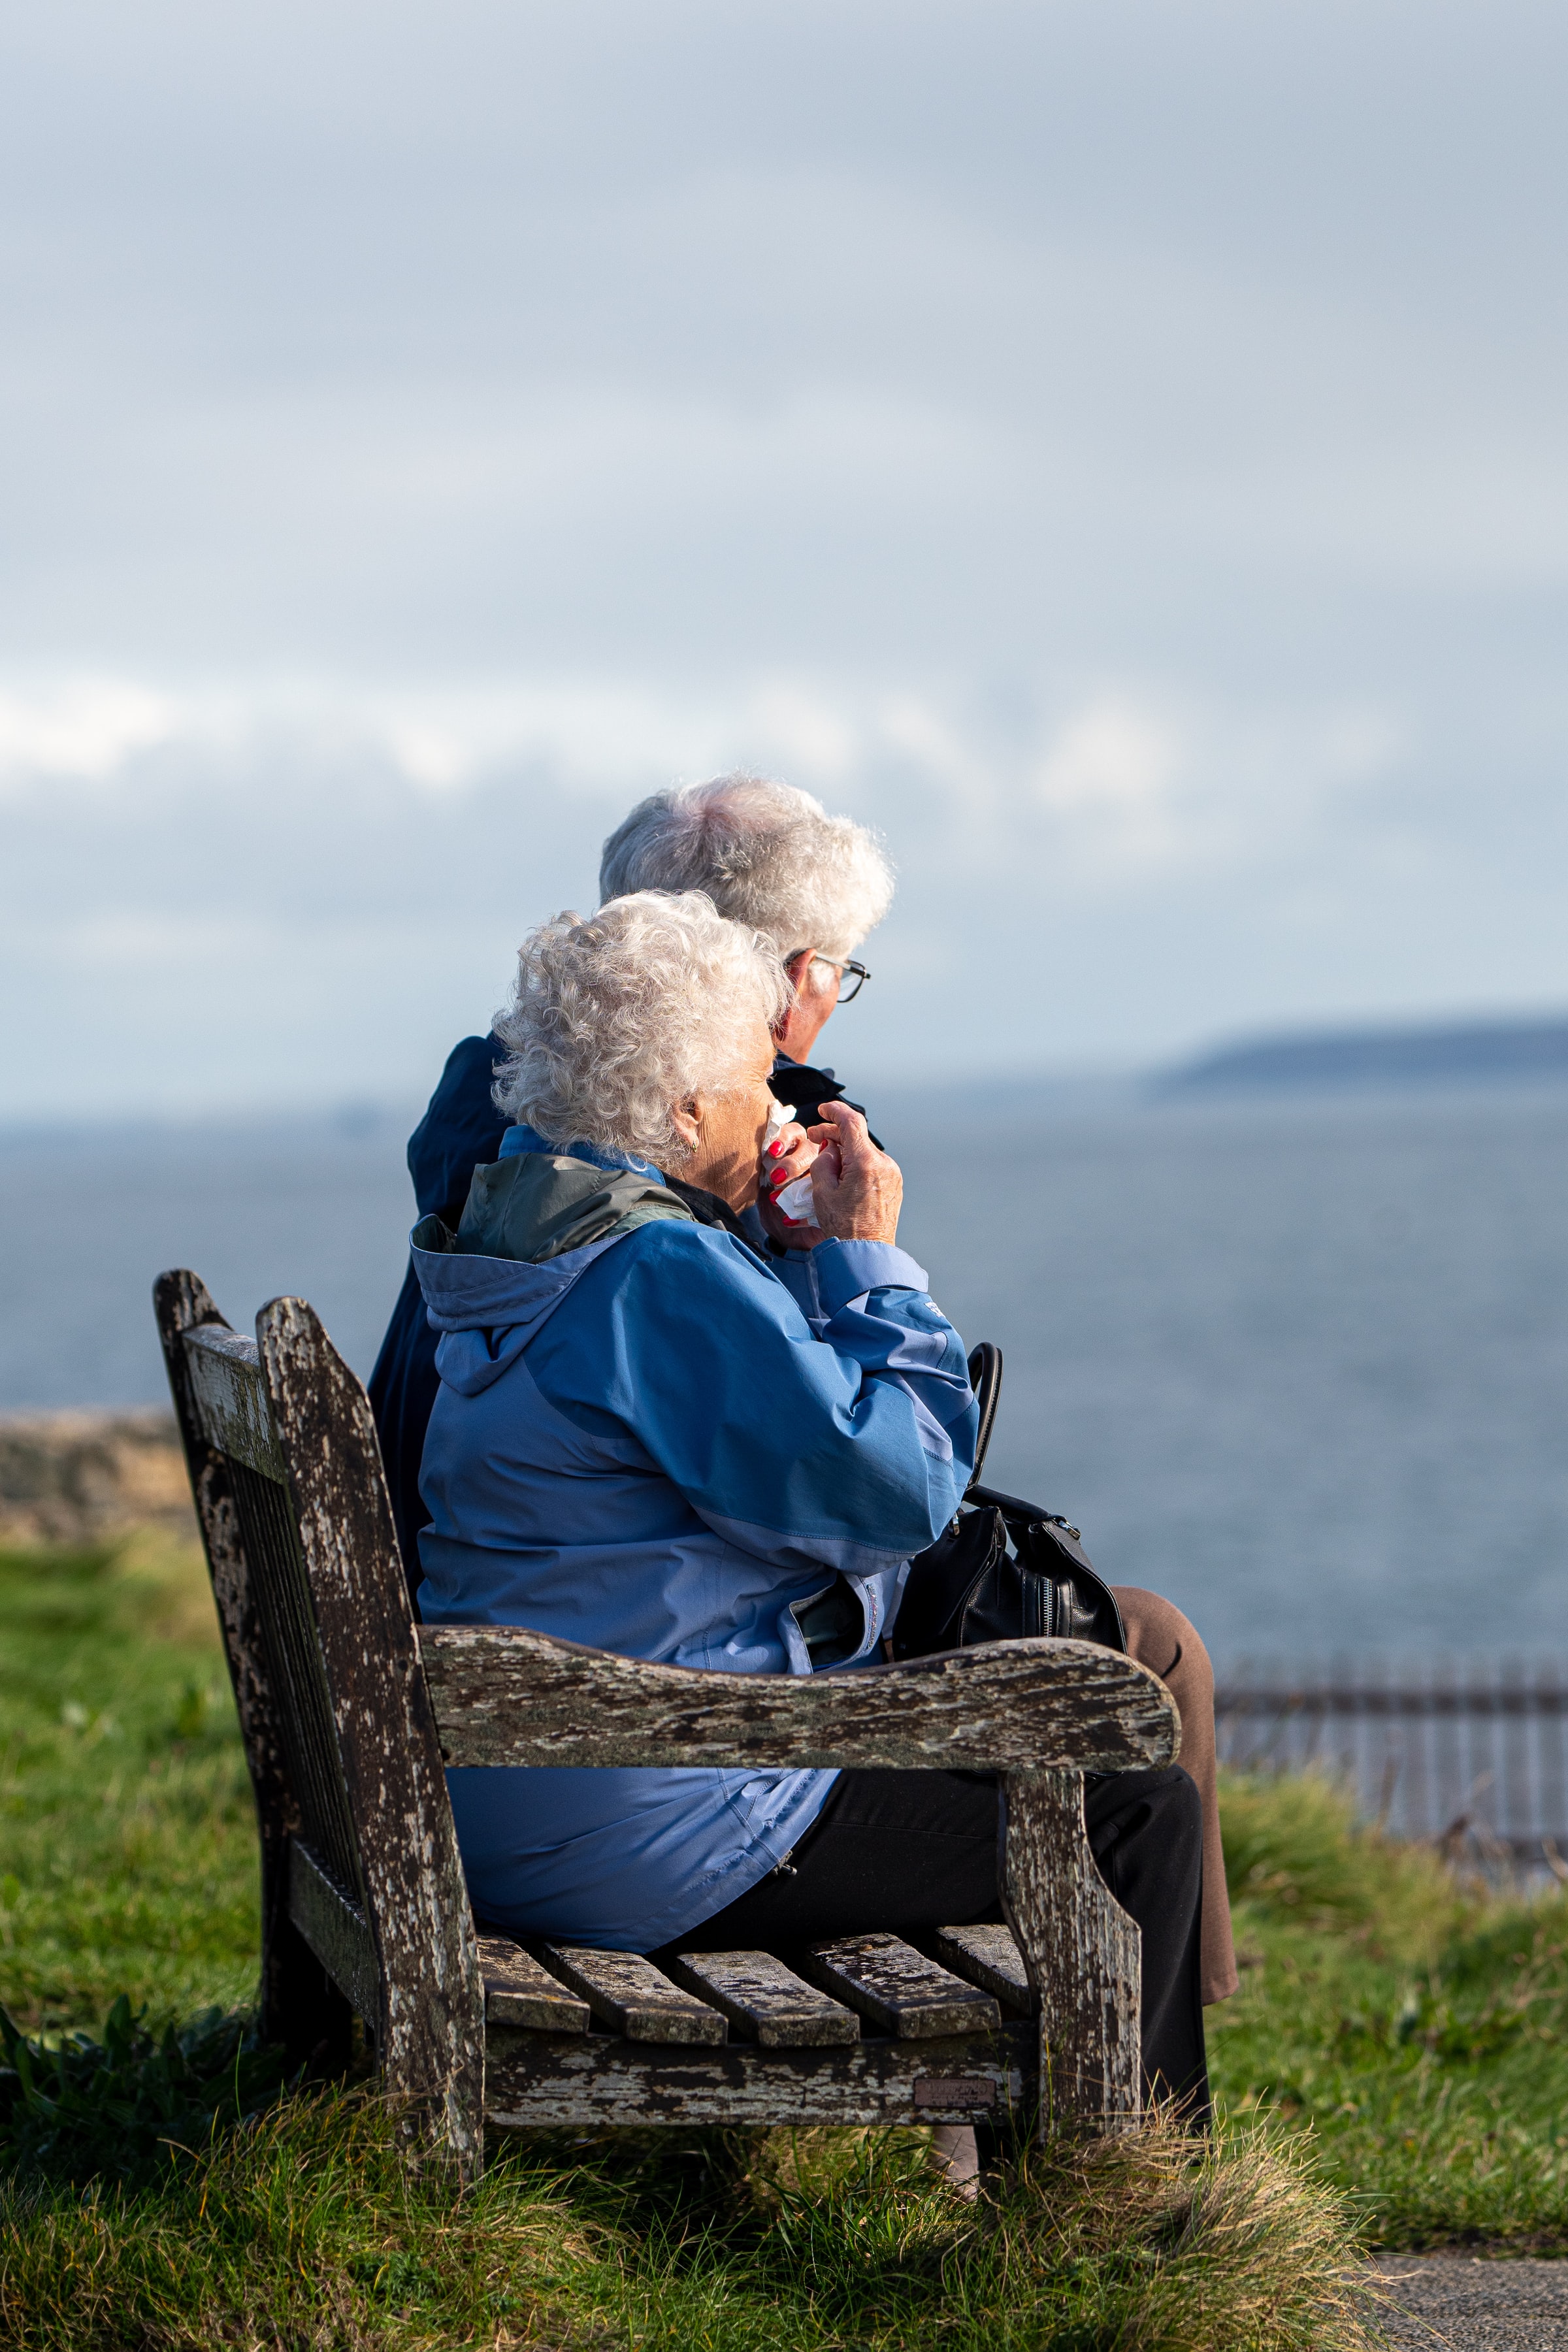 An elderly couple seating on a bench, overlooking the sea